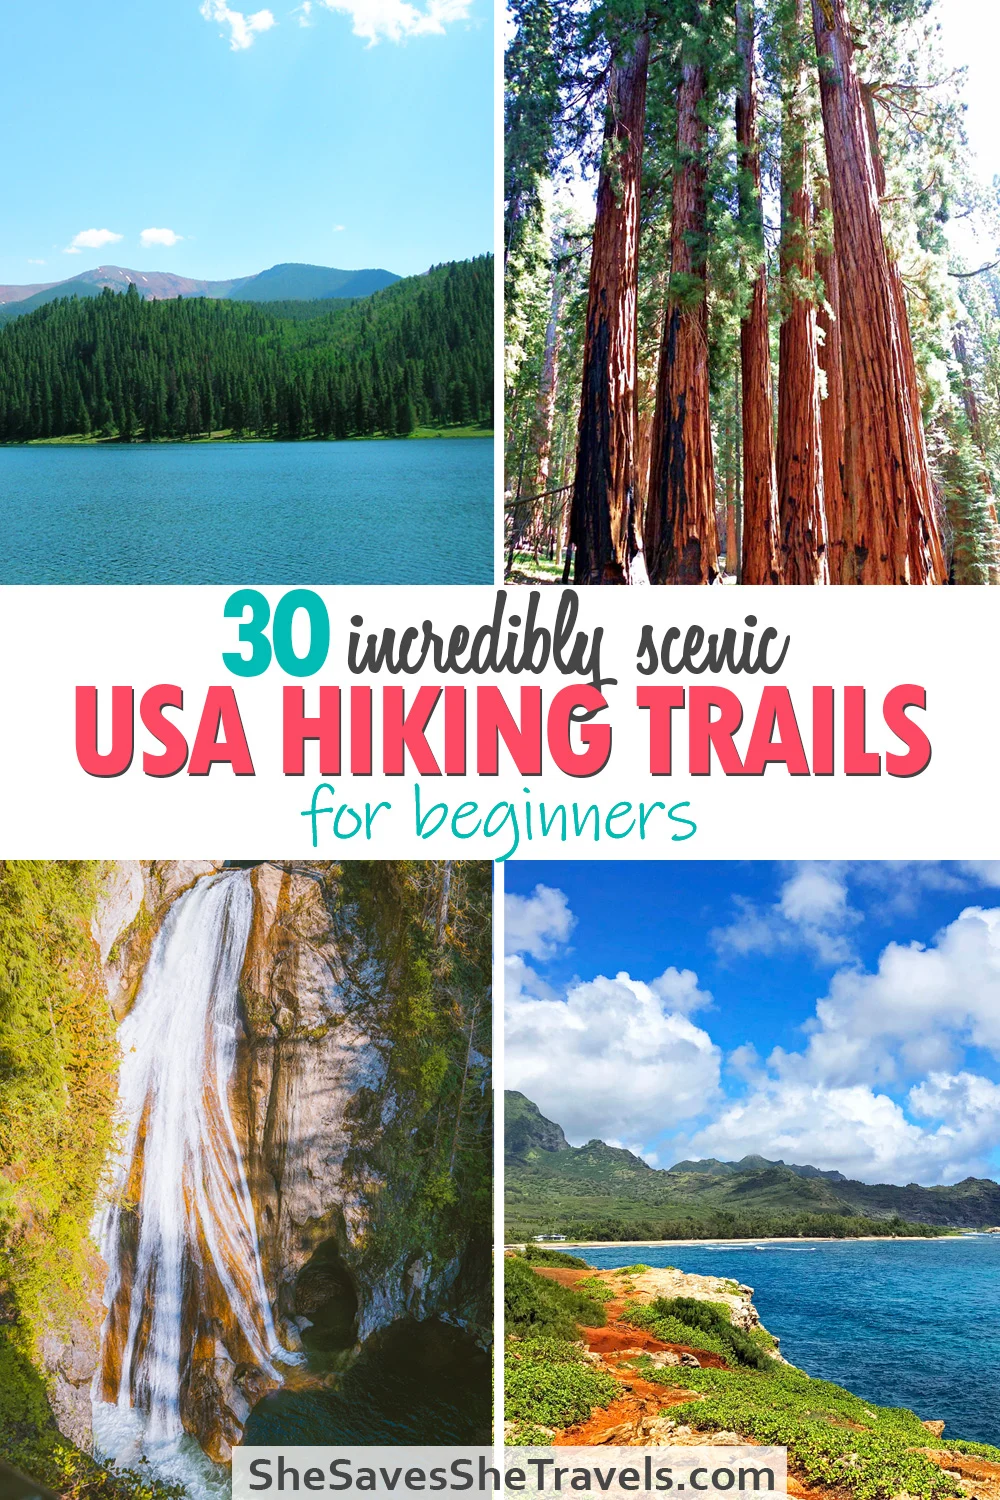 30 incredibly scenic usa hiking trails for beginners